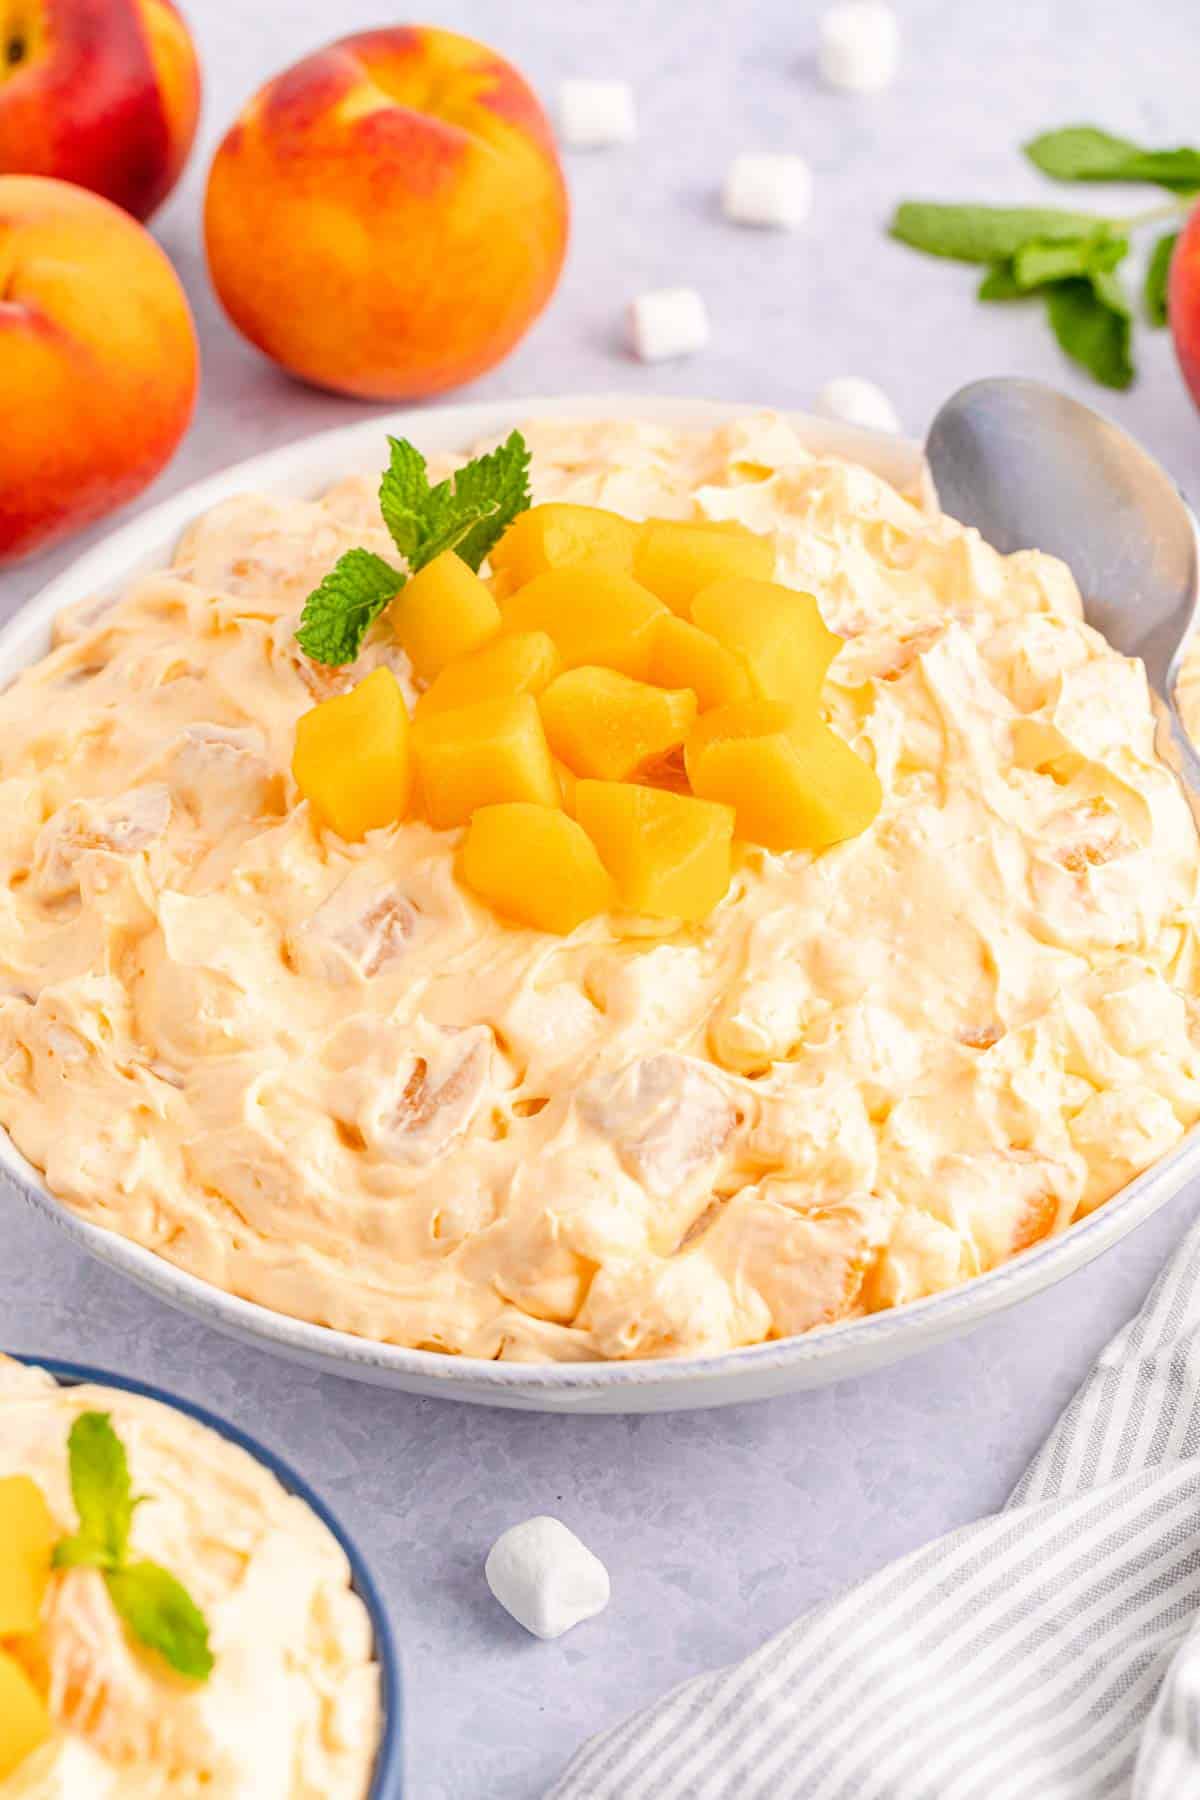 Fluffy orange "fluff" with chopped peaches